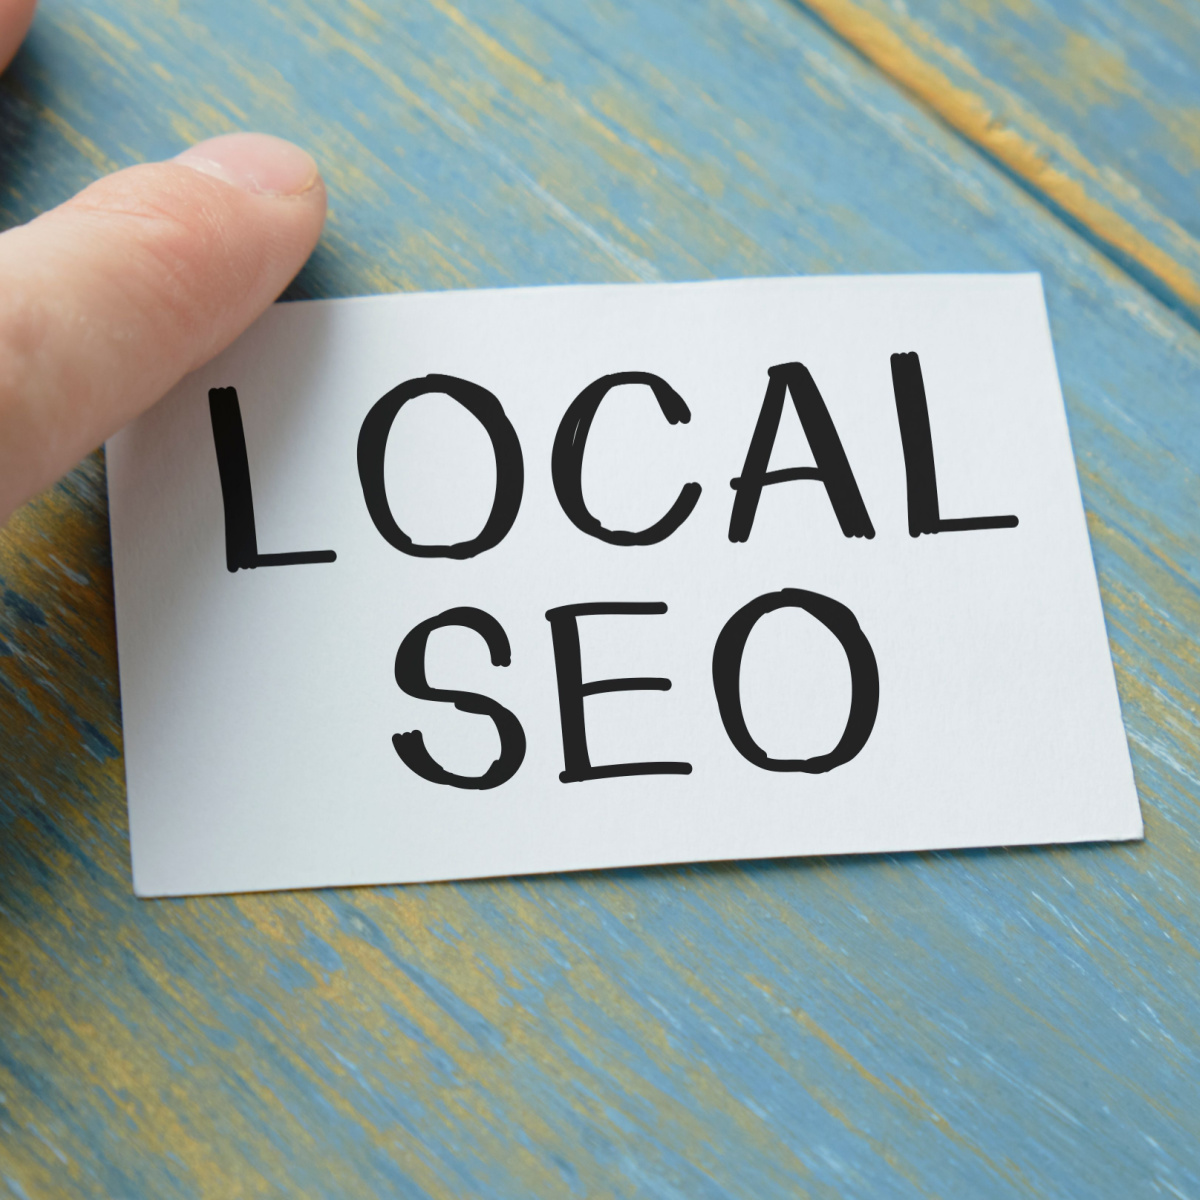 Business owner makes a note to remind him about the importance of Local SEO to his Houston digital marketing efforts.